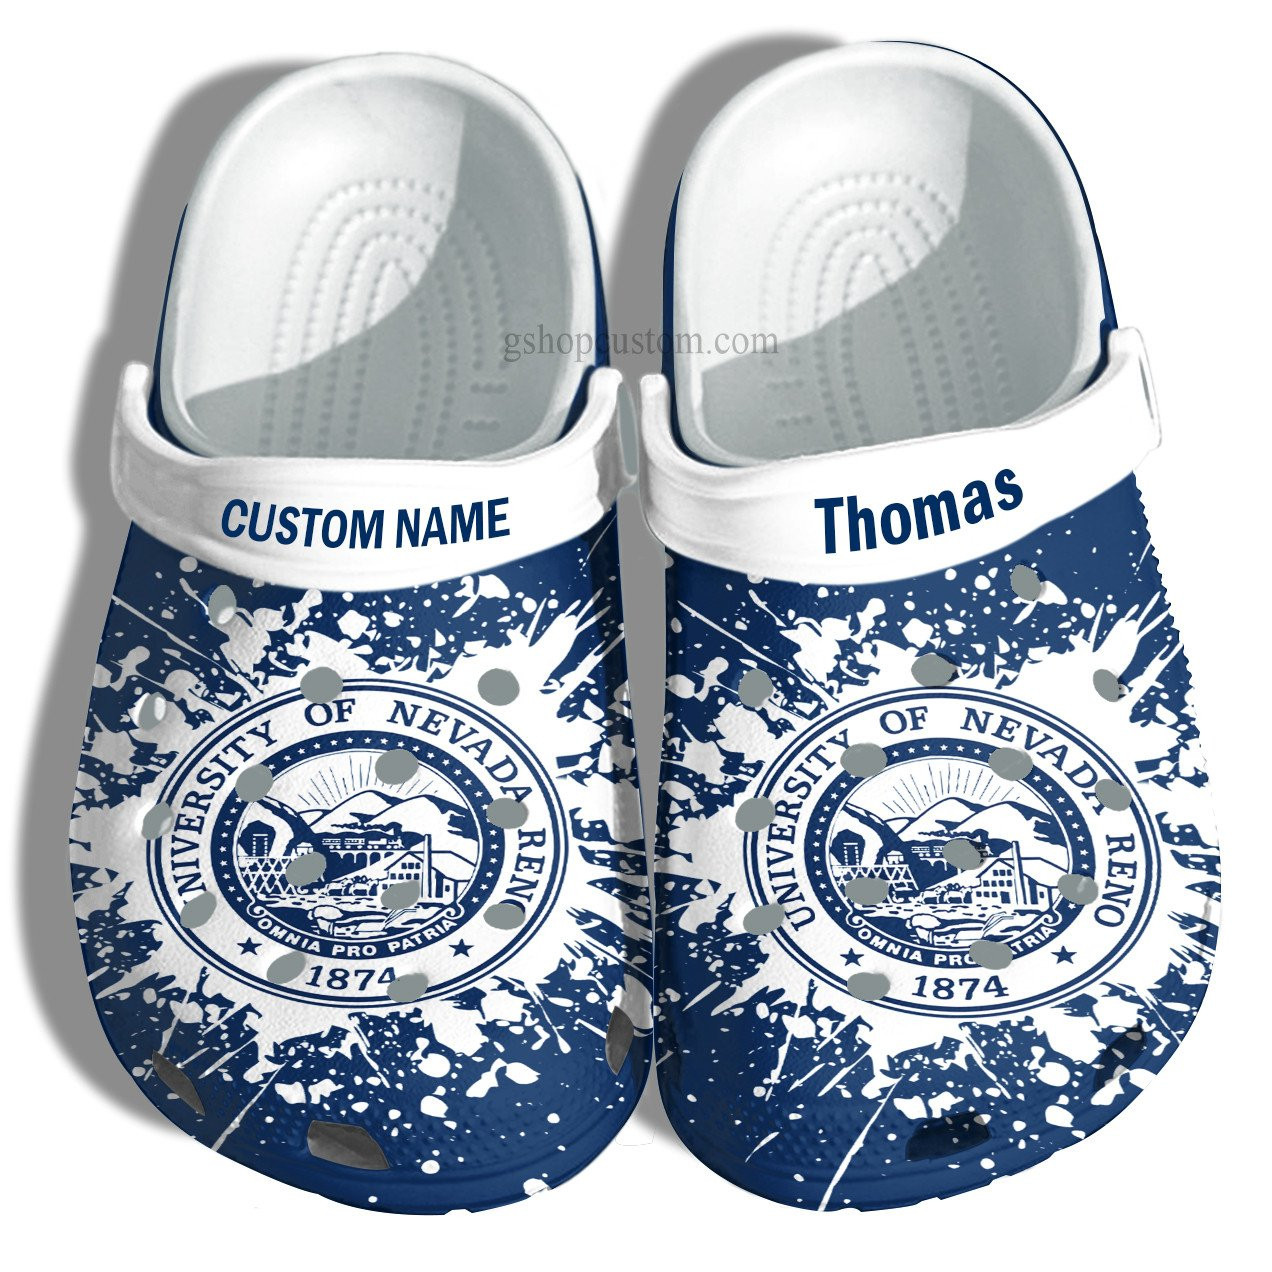 University Of Nevada Reno Graduation Gifts Croc Shoes Customize- Admission Gift Crocs Shoes